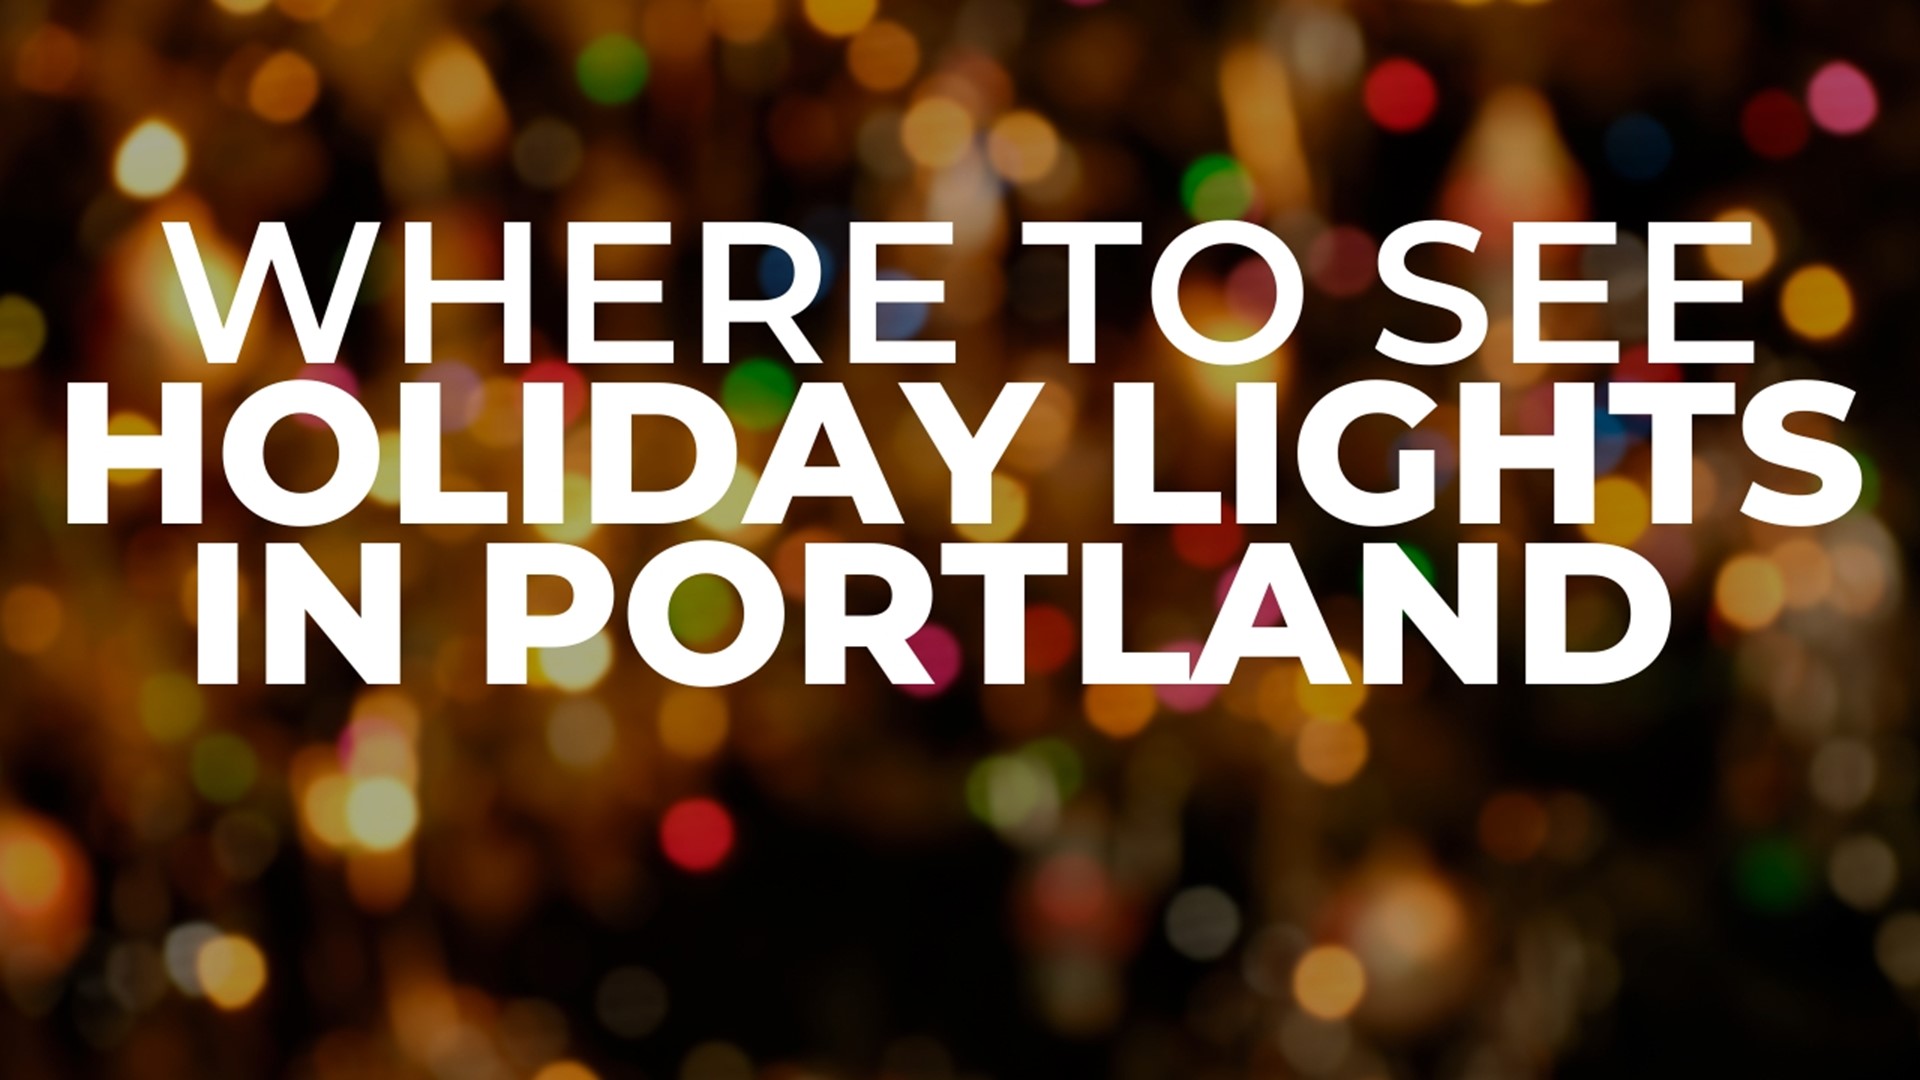 Here are some of the places where you can go see holiday lights in the Portland metro area this season.